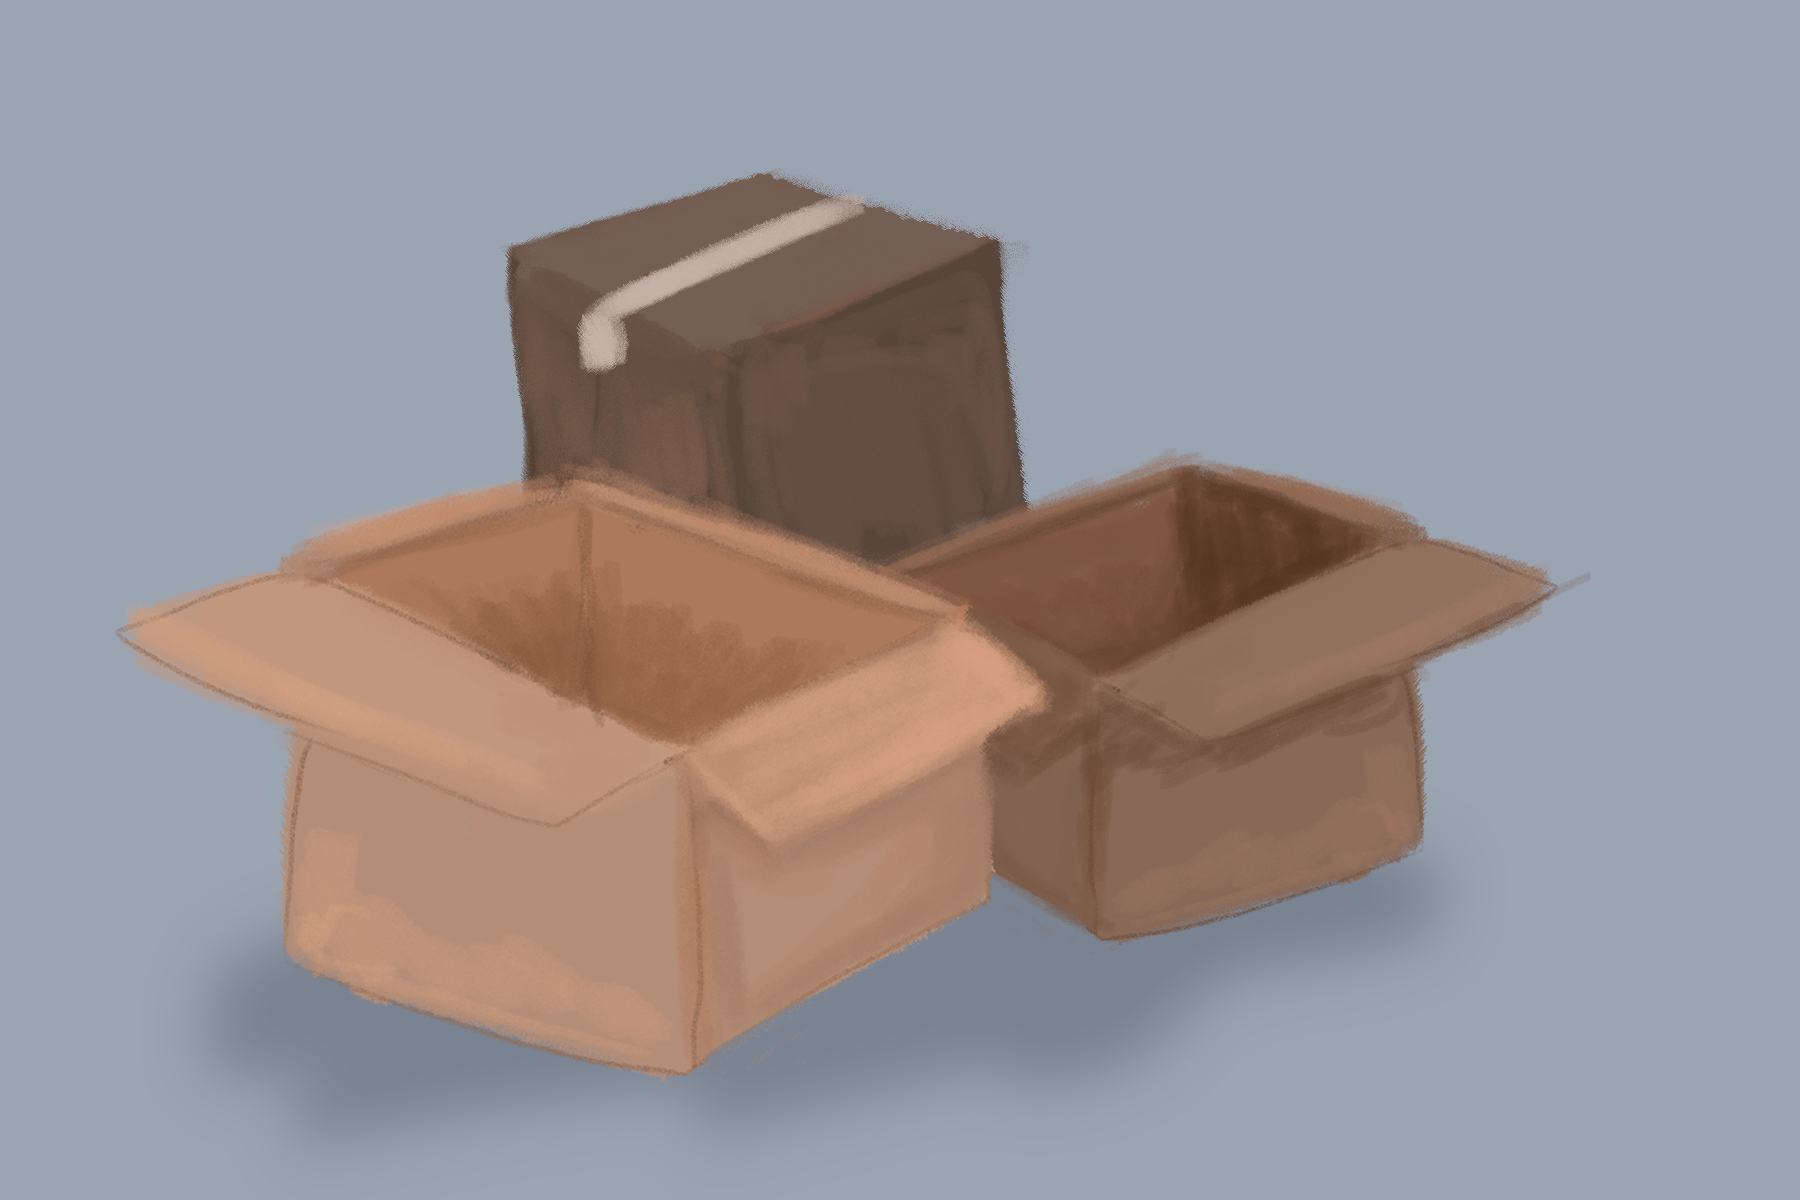 Illustration of boxes from Unpacking.